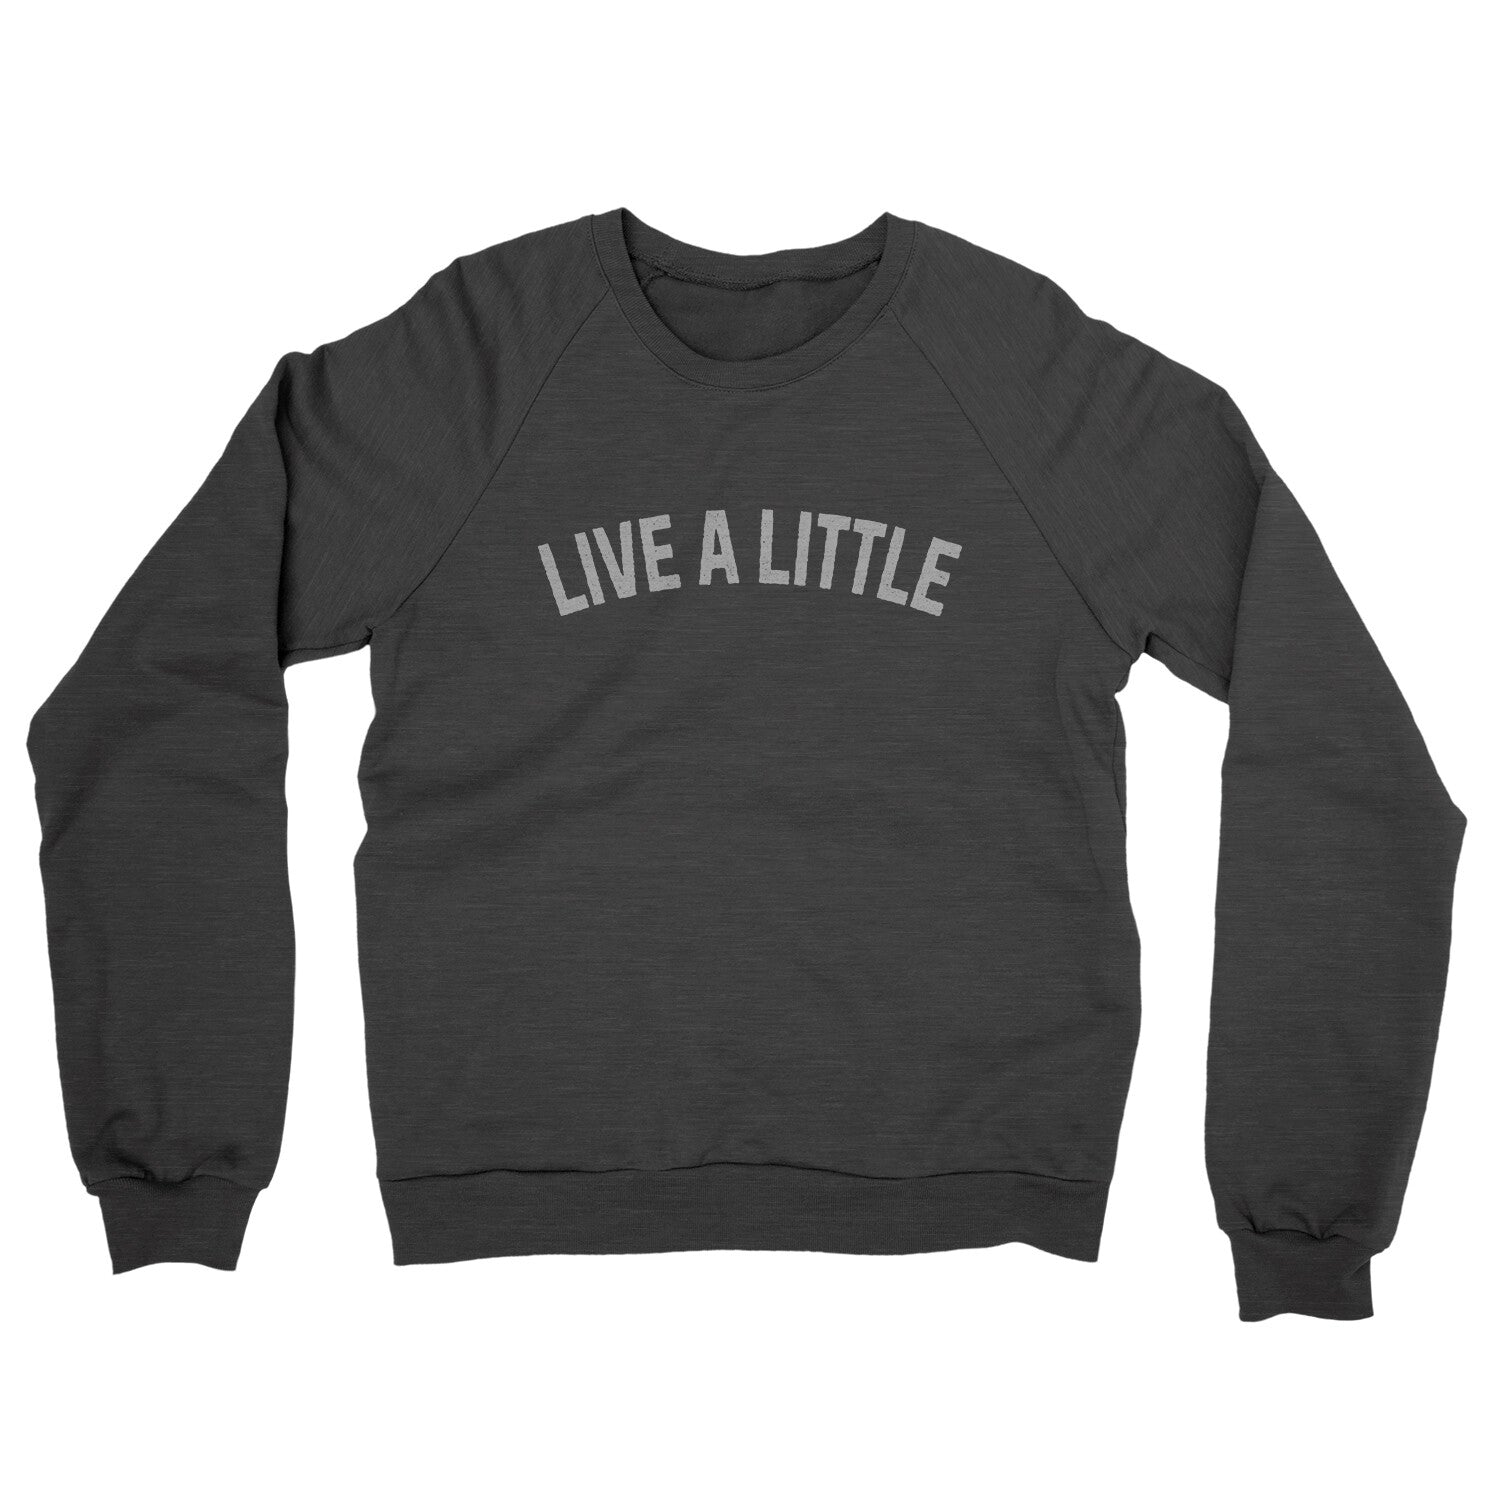 Live a Little in Charcoal Heather Color